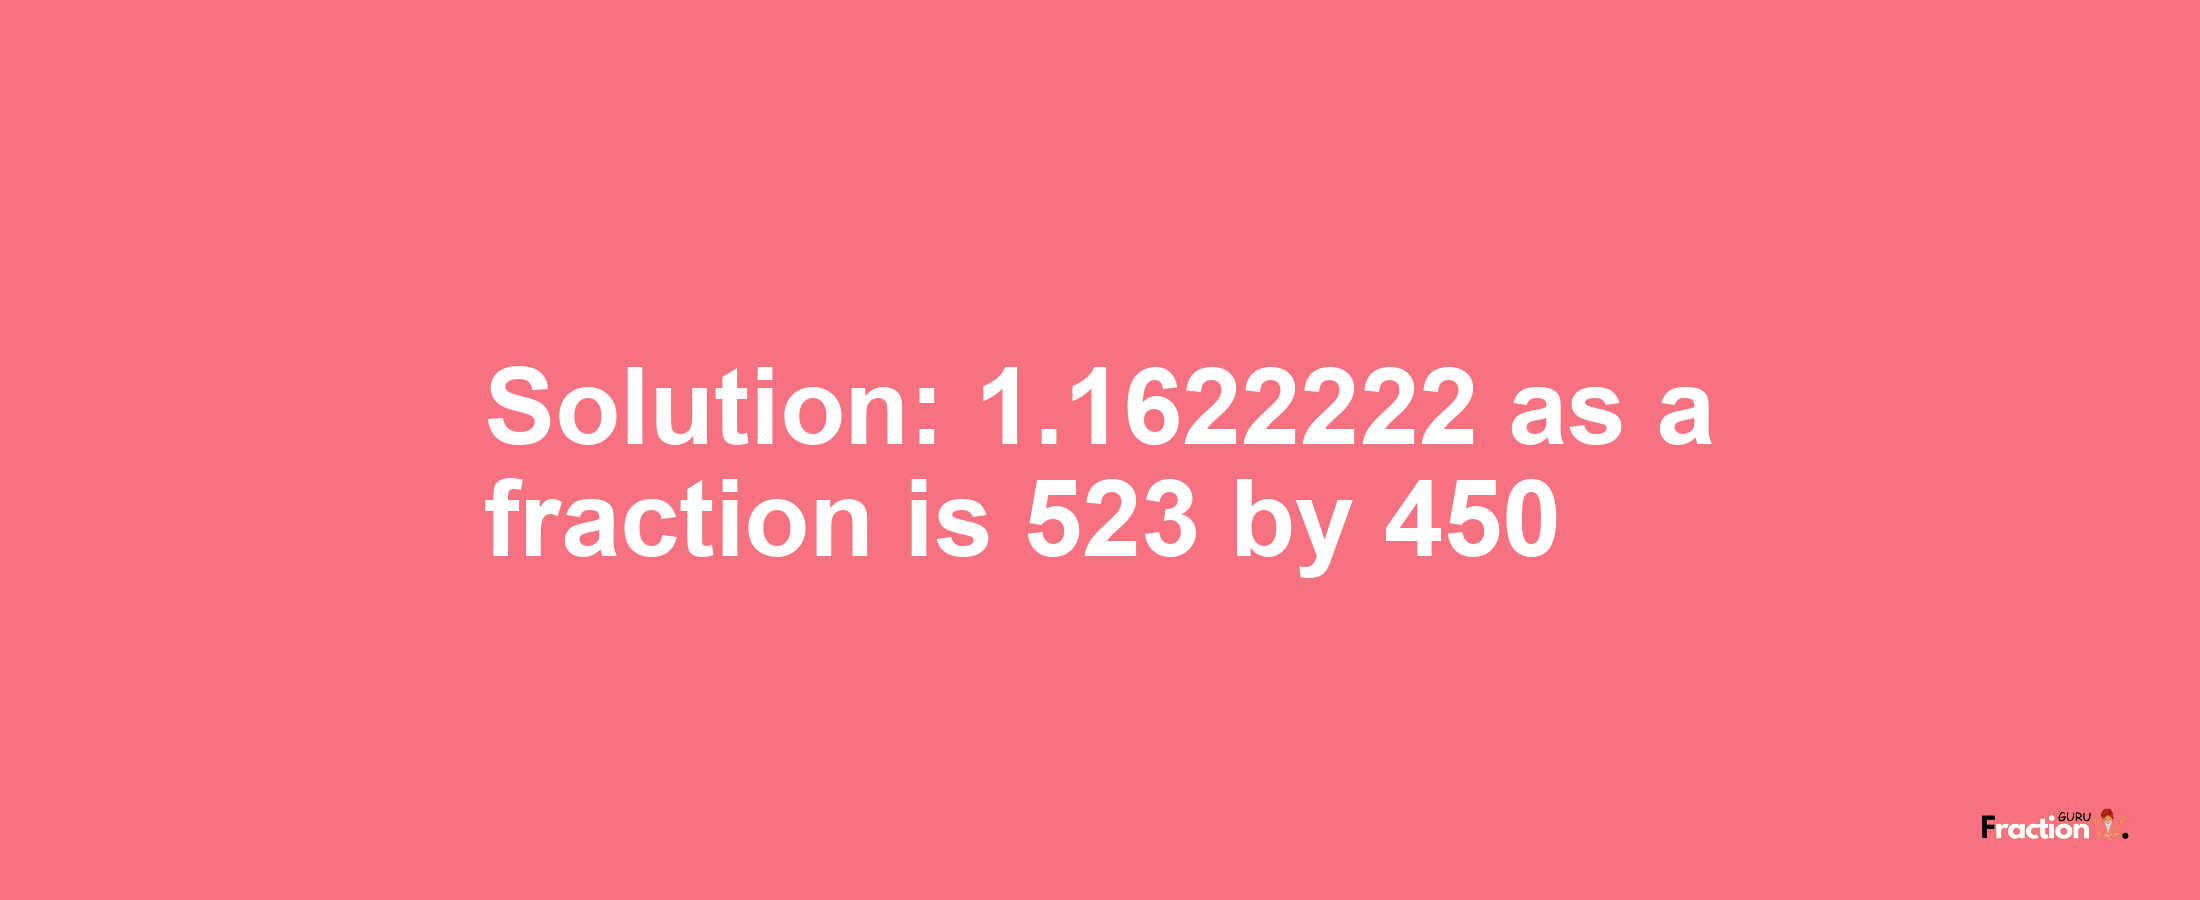 Solution:1.1622222 as a fraction is 523/450